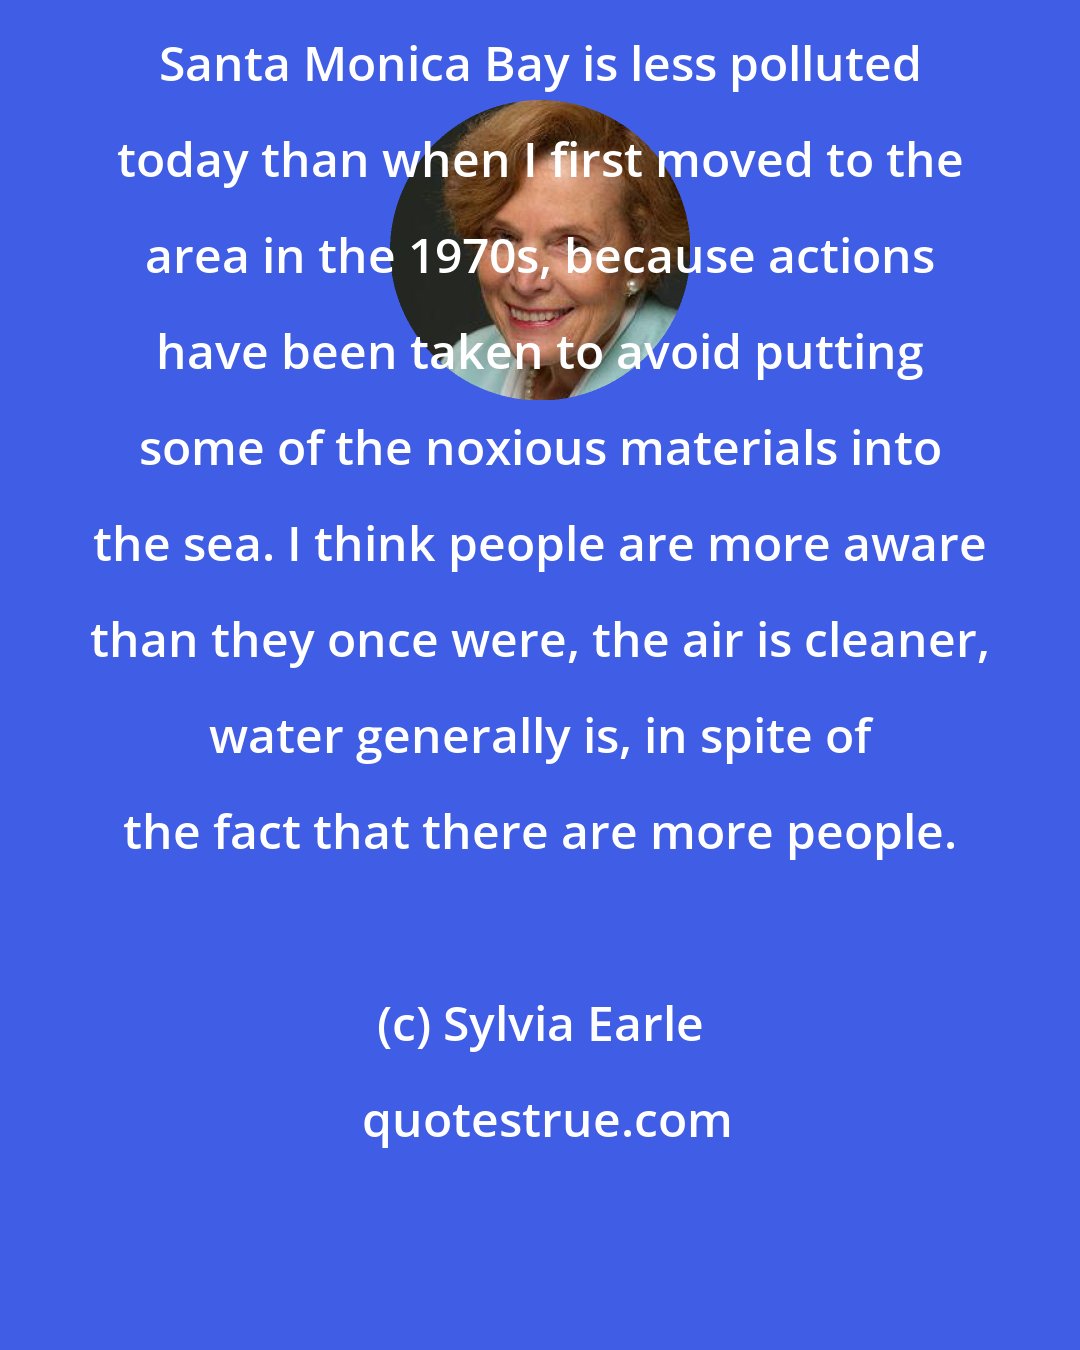 Sylvia Earle: Santa Monica Bay is less polluted today than when I first moved to the area in the 1970s, because actions have been taken to avoid putting some of the noxious materials into the sea. I think people are more aware than they once were, the air is cleaner, water generally is, in spite of the fact that there are more people.